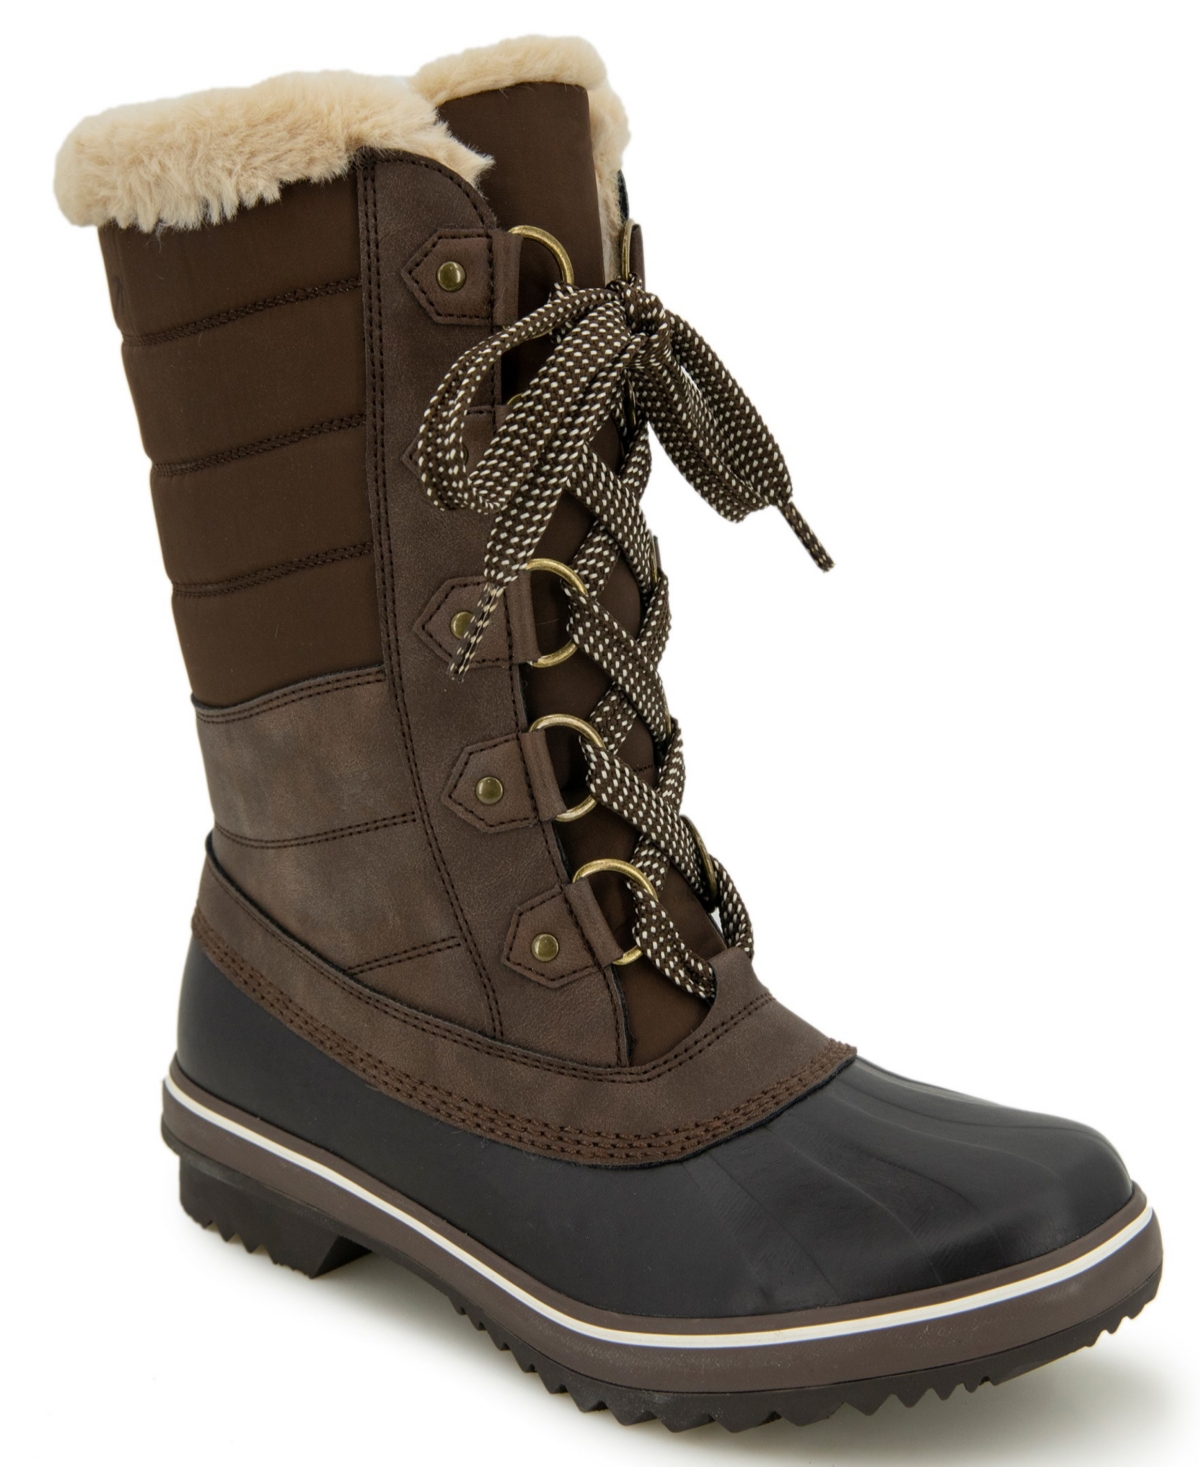 Women's Siberia Waterproof Lace-Up Quilted Cold-Weather Boots - Brown